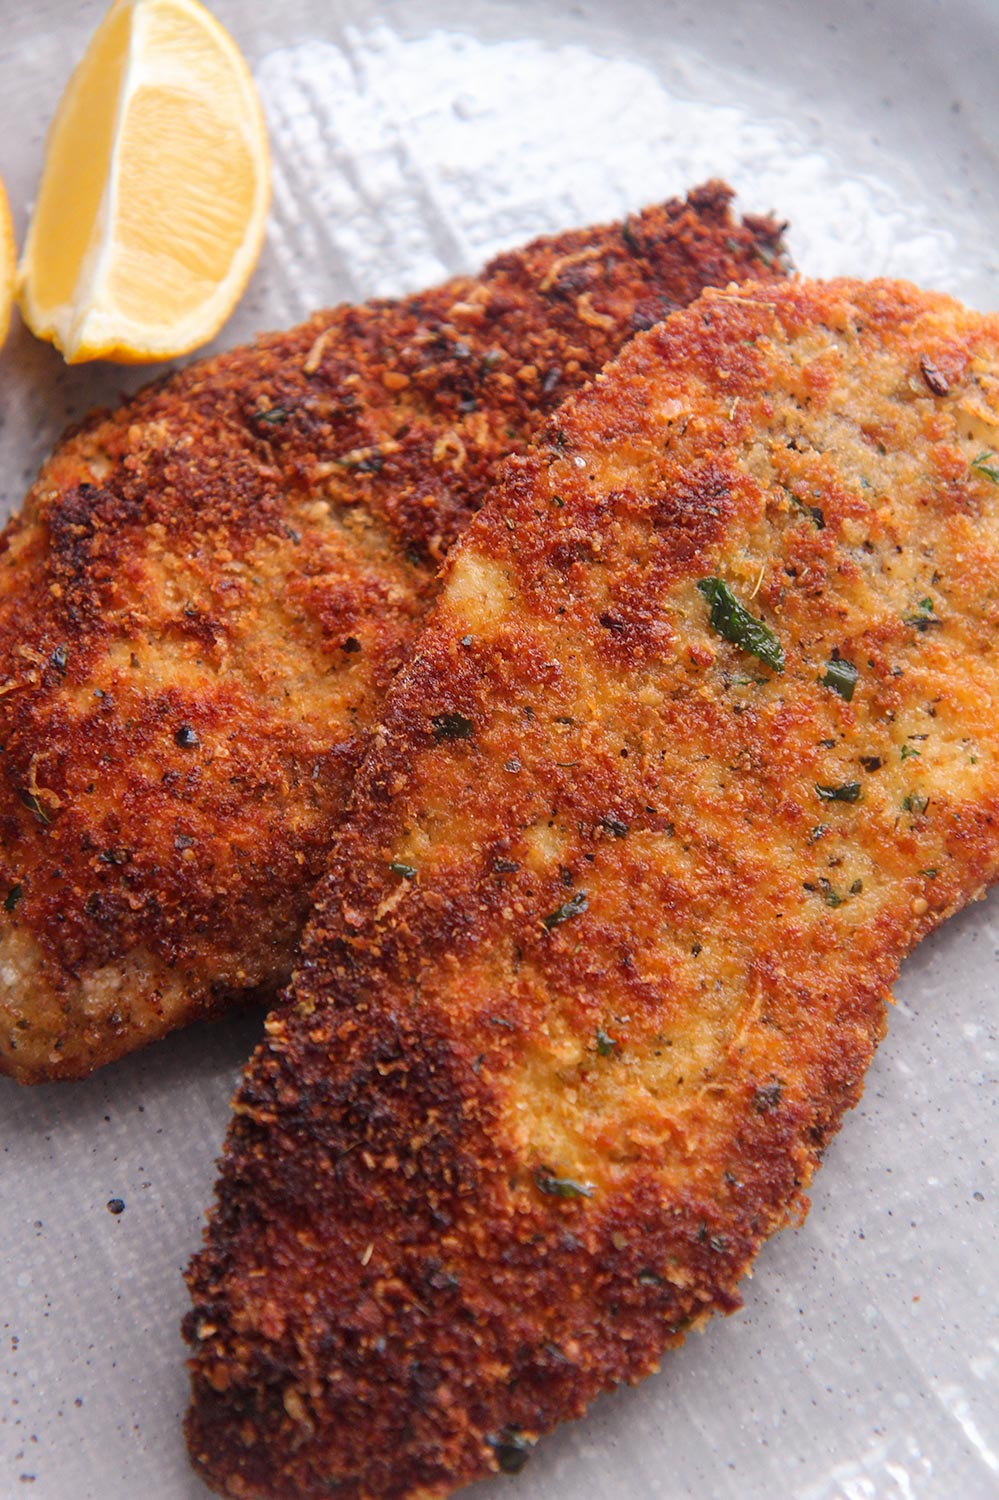 two crispy chicken cutlets with a lemon wedge on the side.